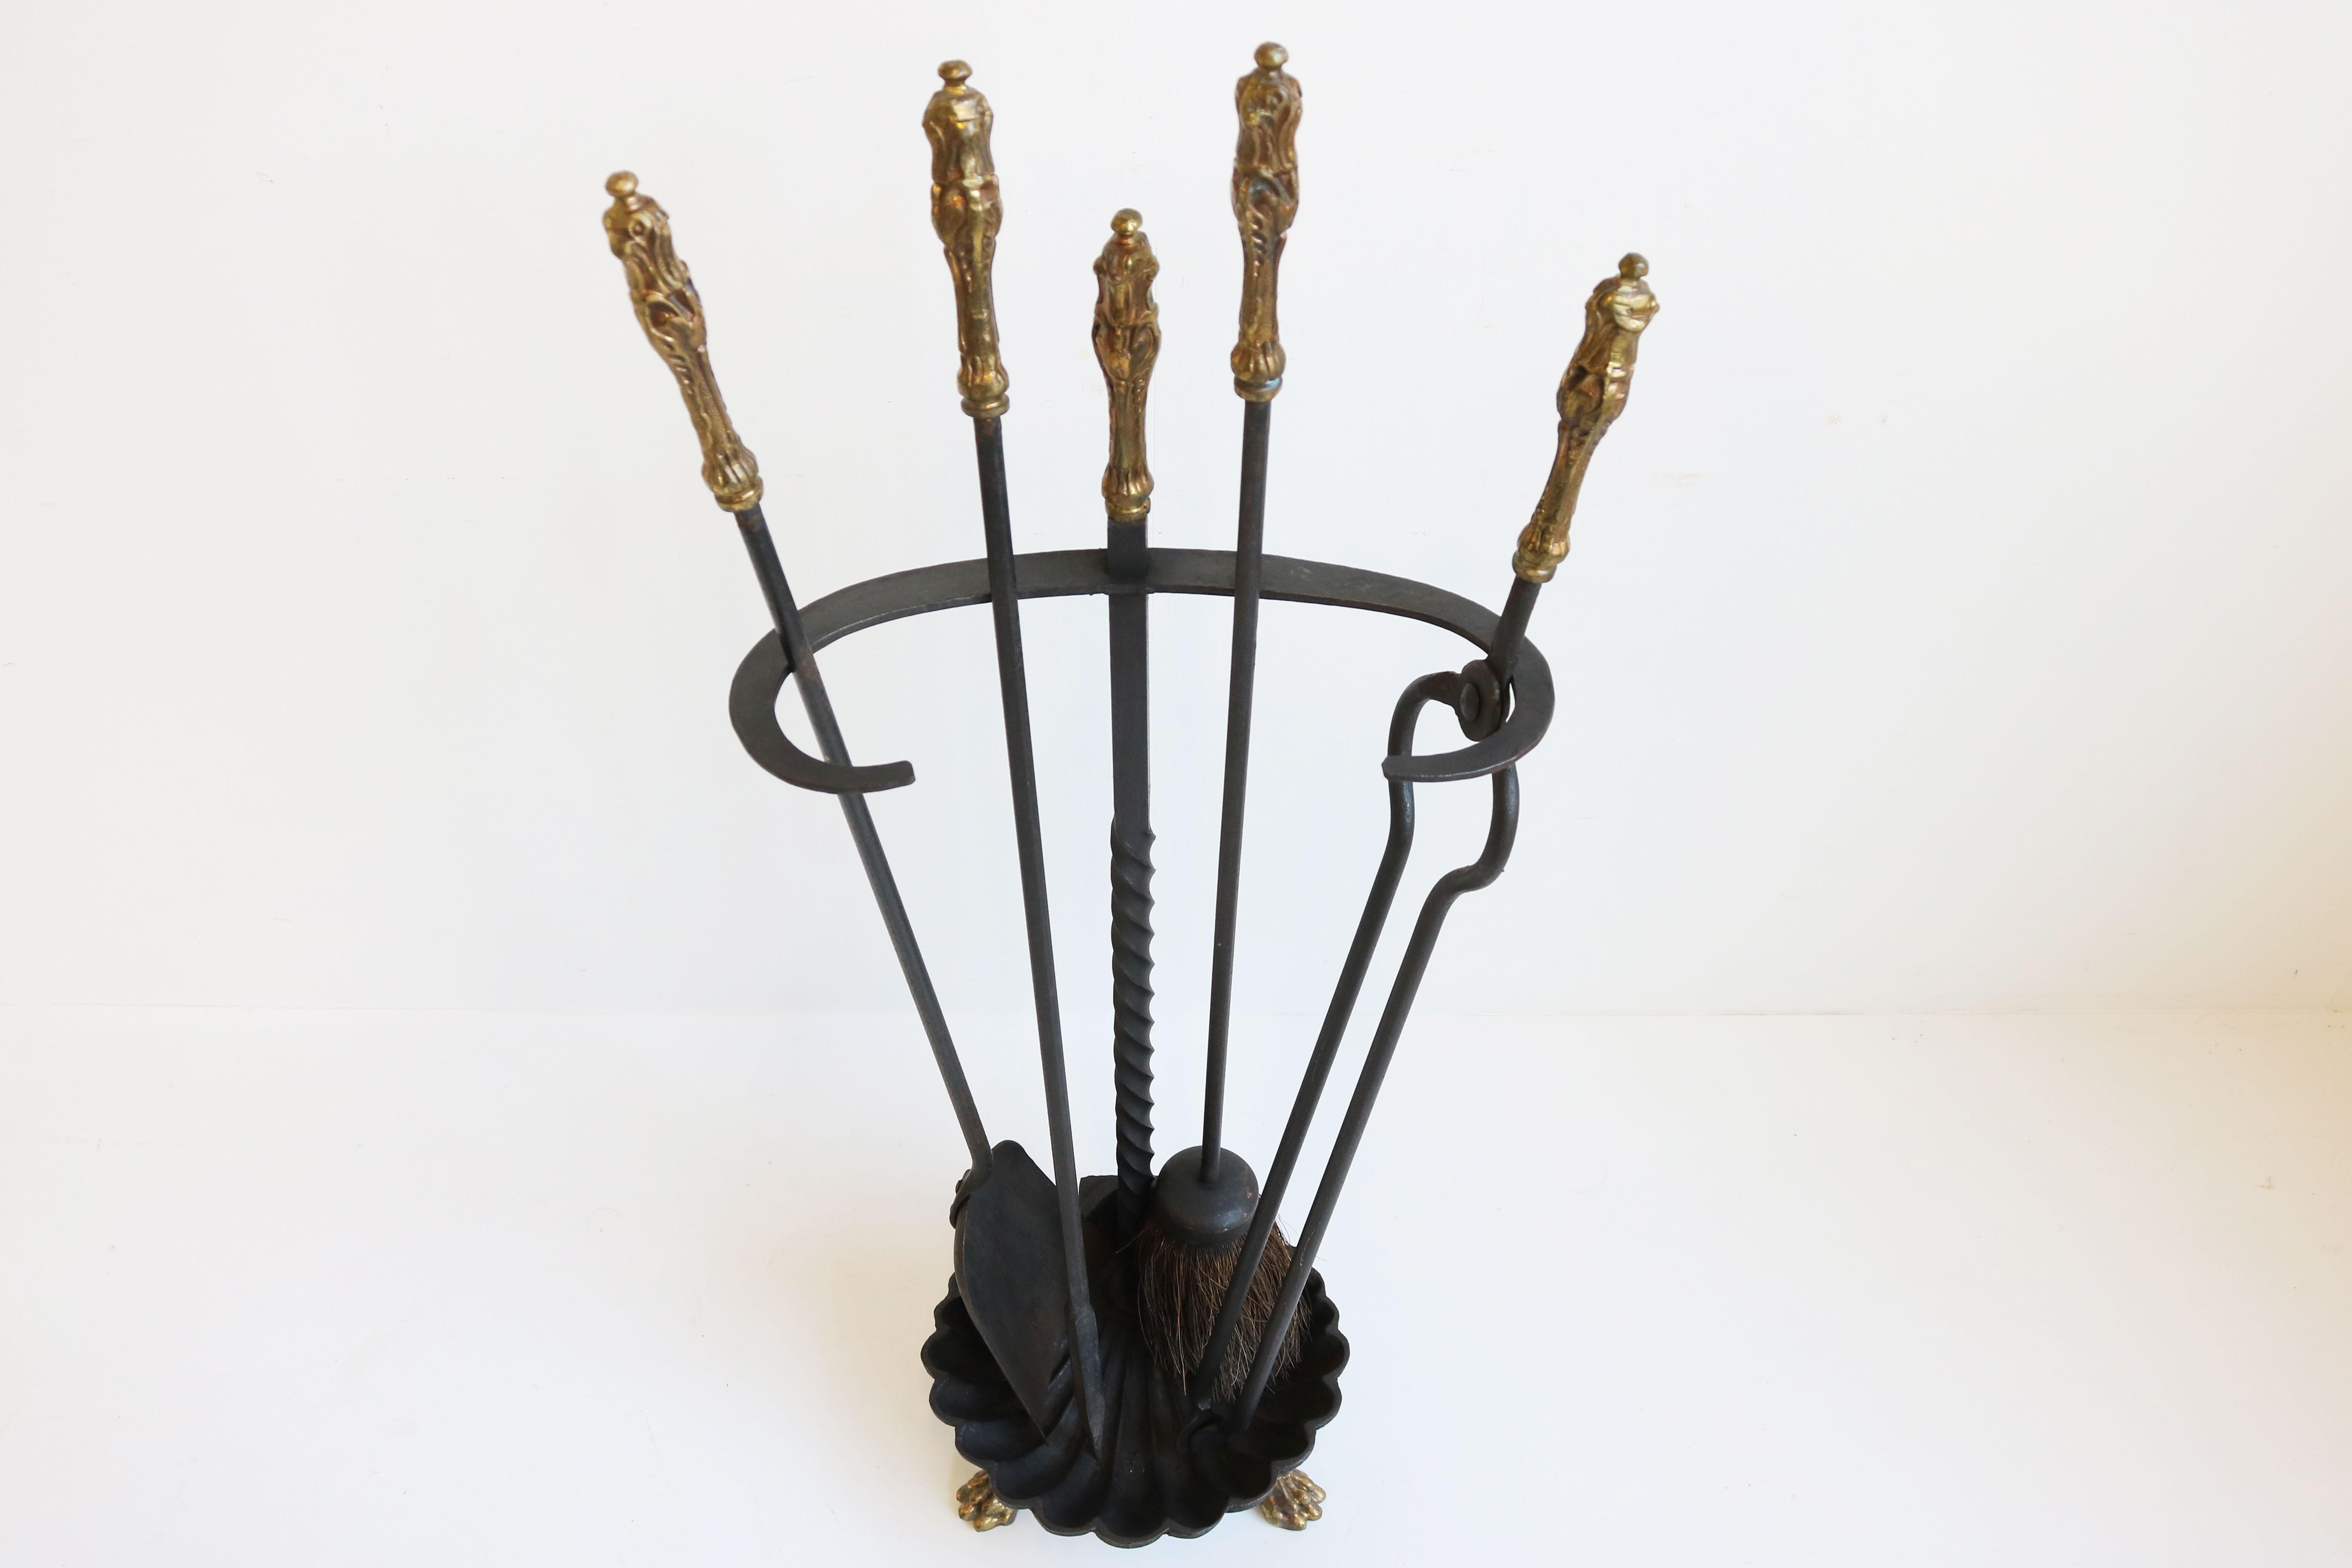 Gorgeous antique French fireplace set 19th century Renaissance revival 
Made out of wrought iron with brass grips & brass lion feet. Amazing details & craftsmanship. 
Decorate your fireplace with this rare antique set practical & gorgeous. 
Very